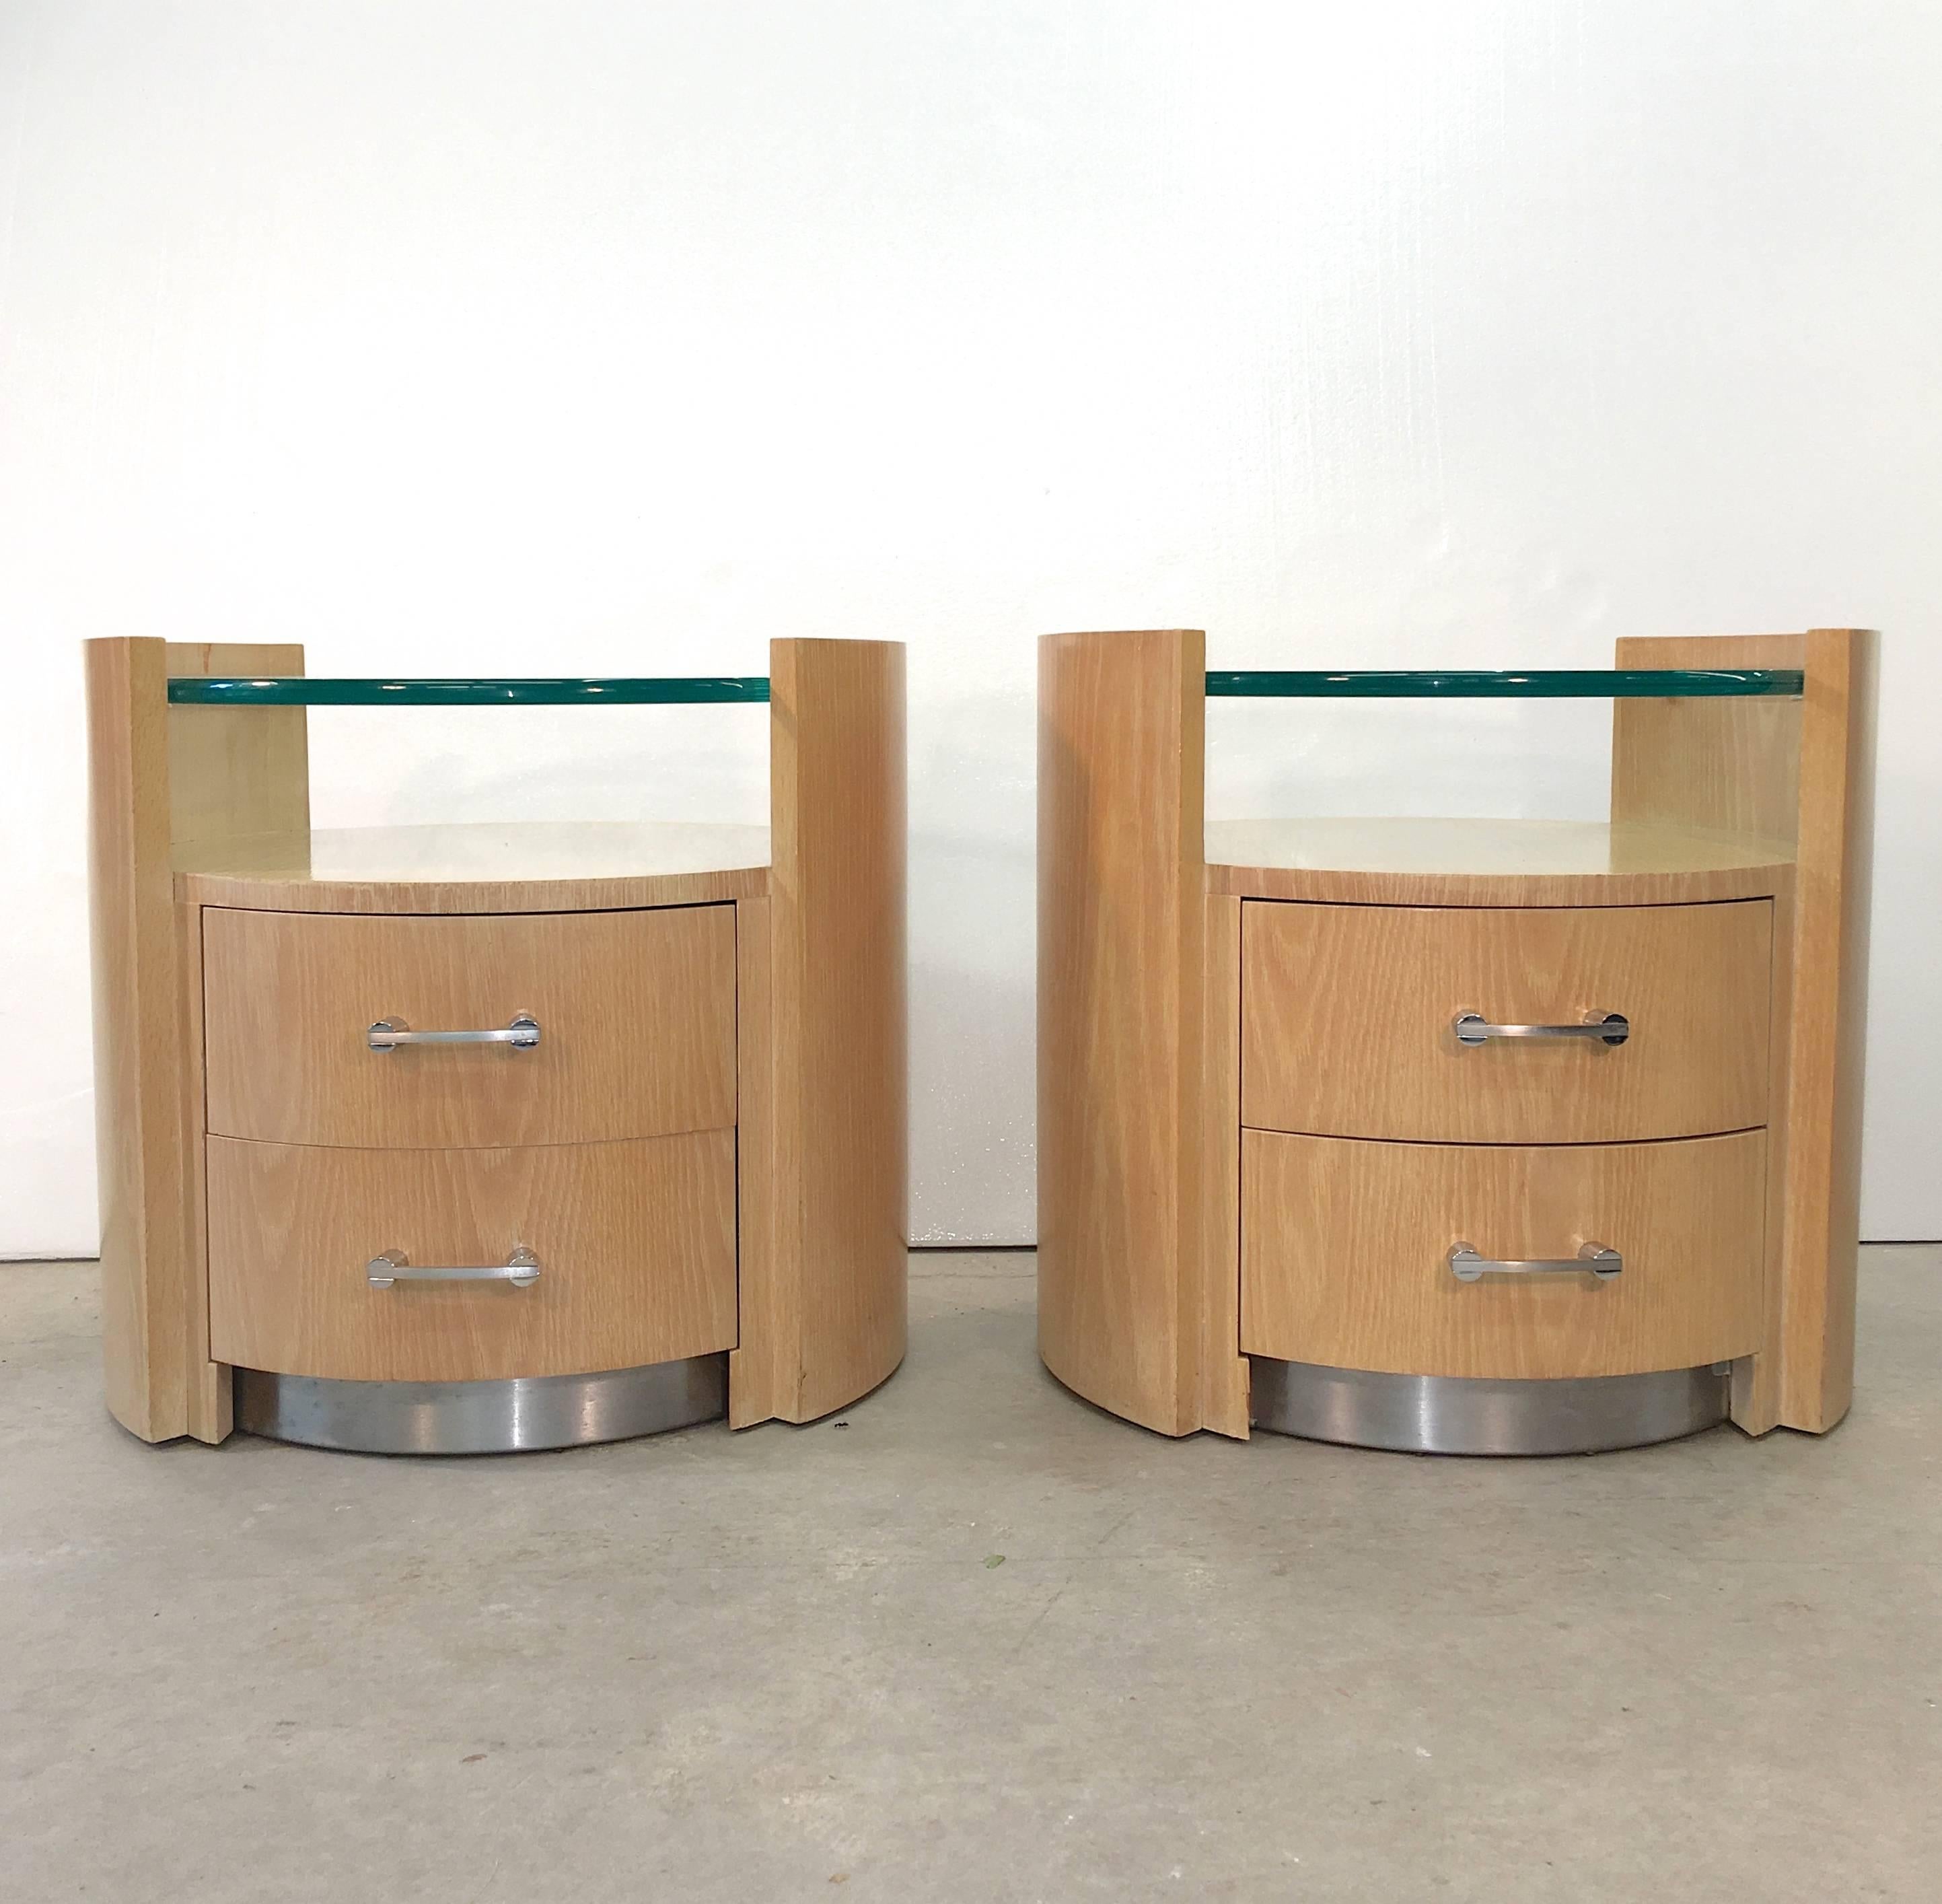 Pair of cerused oak nightstands in ovoid form with two drawers, brush stainless pulls and recessed plinth with floating glass top by Jay Spectre for Century Furniture.